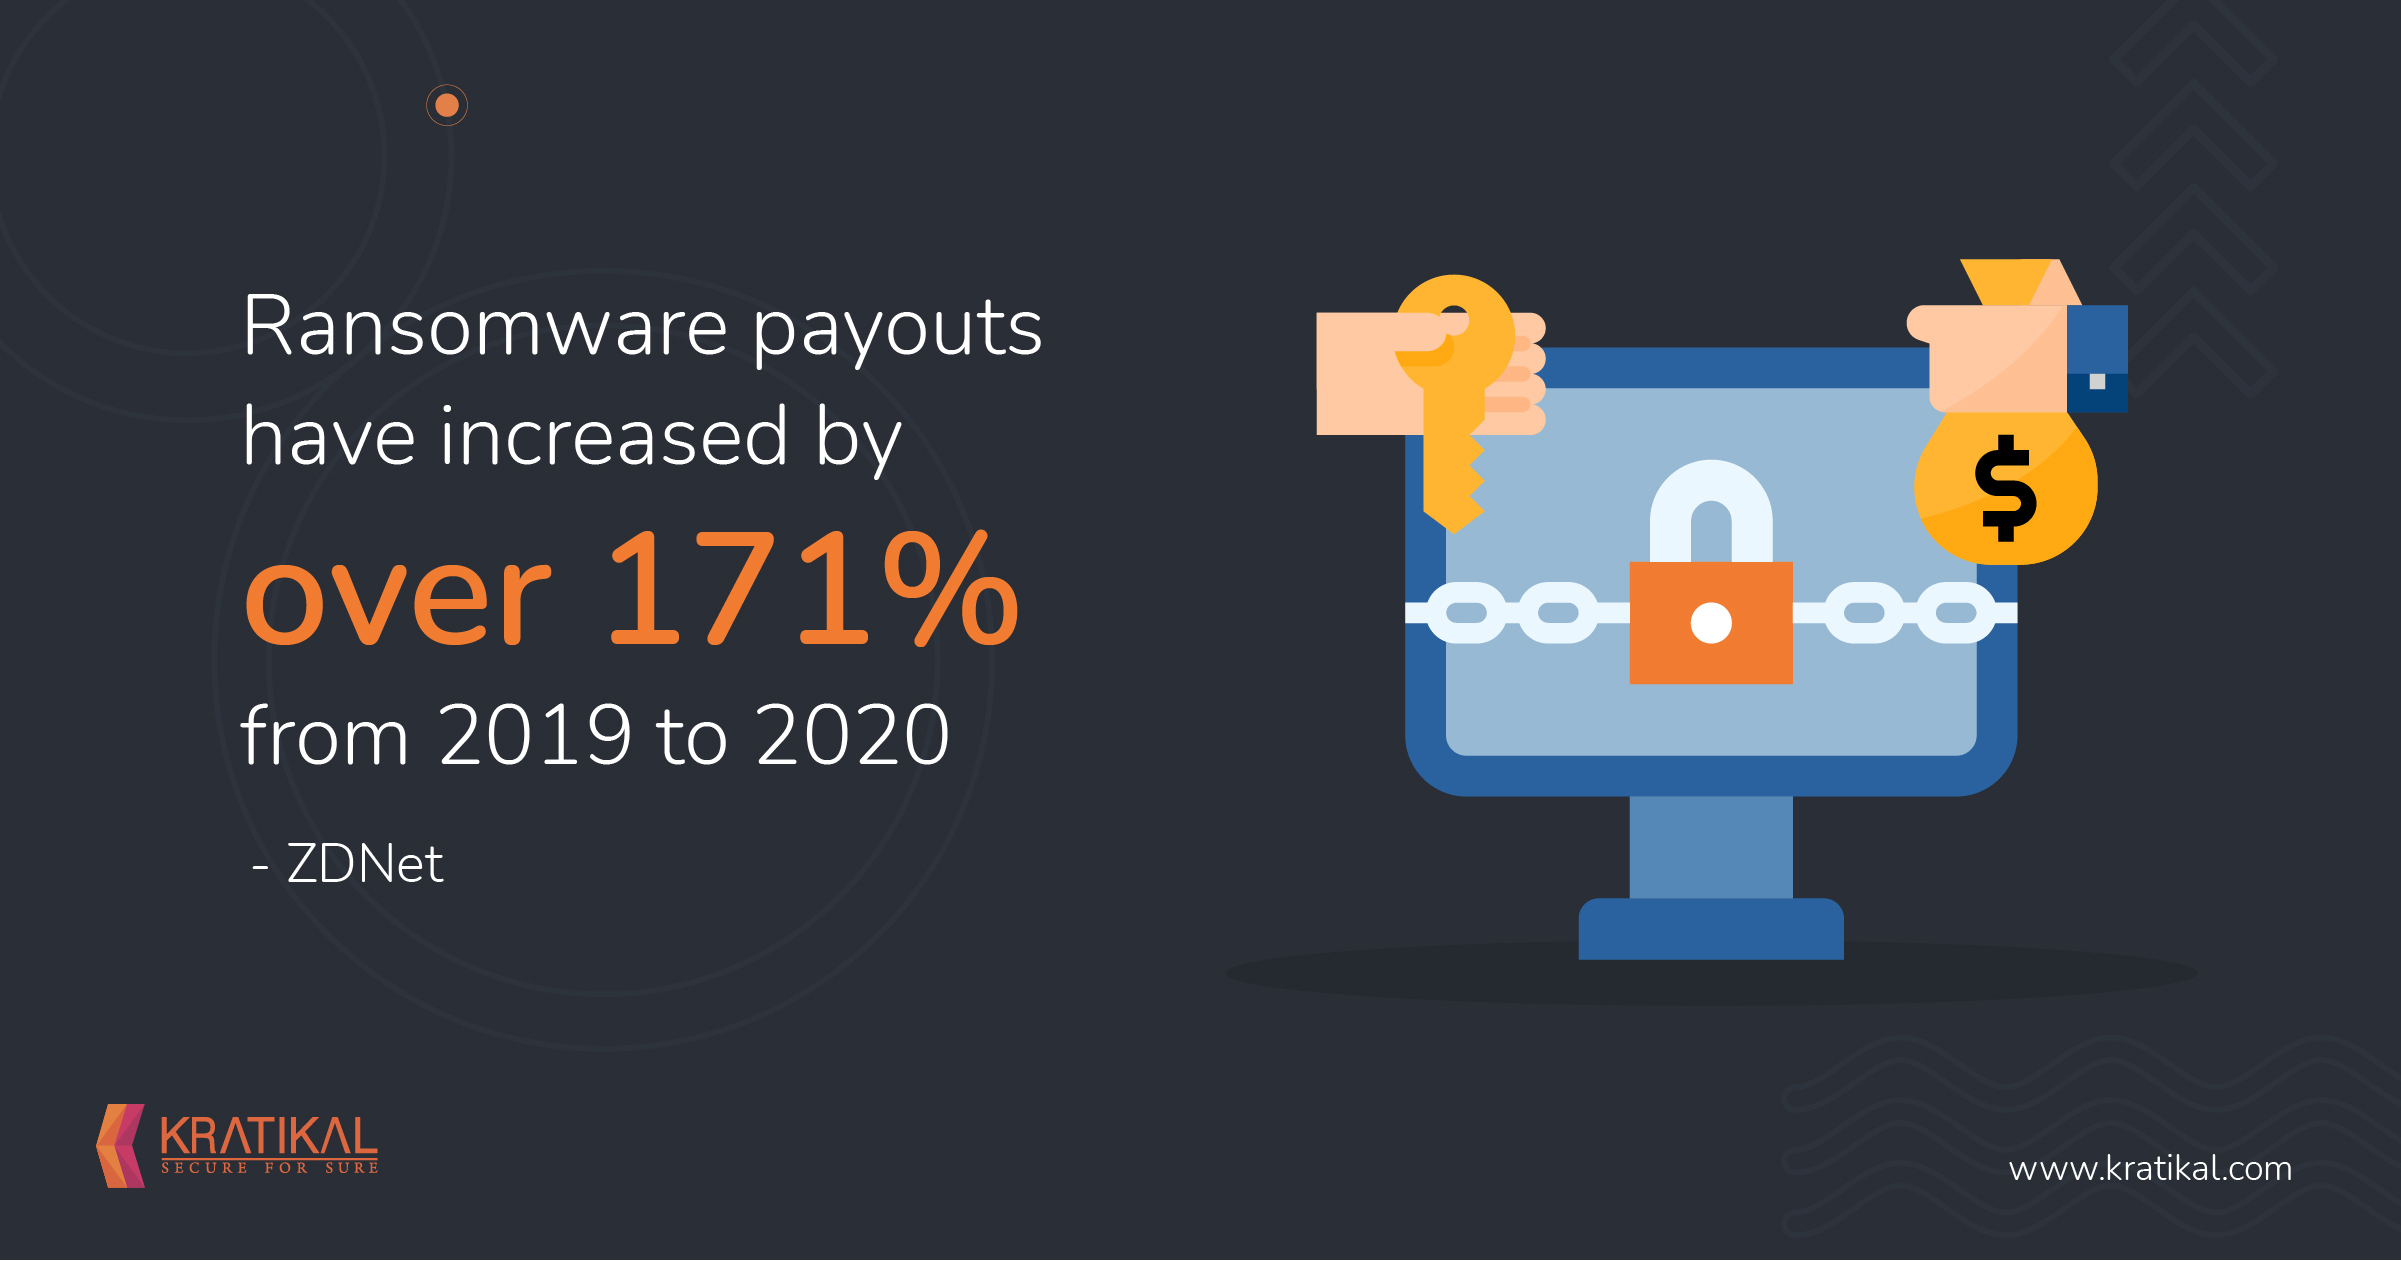 Paying the Ransom for Ransomeware Attacks